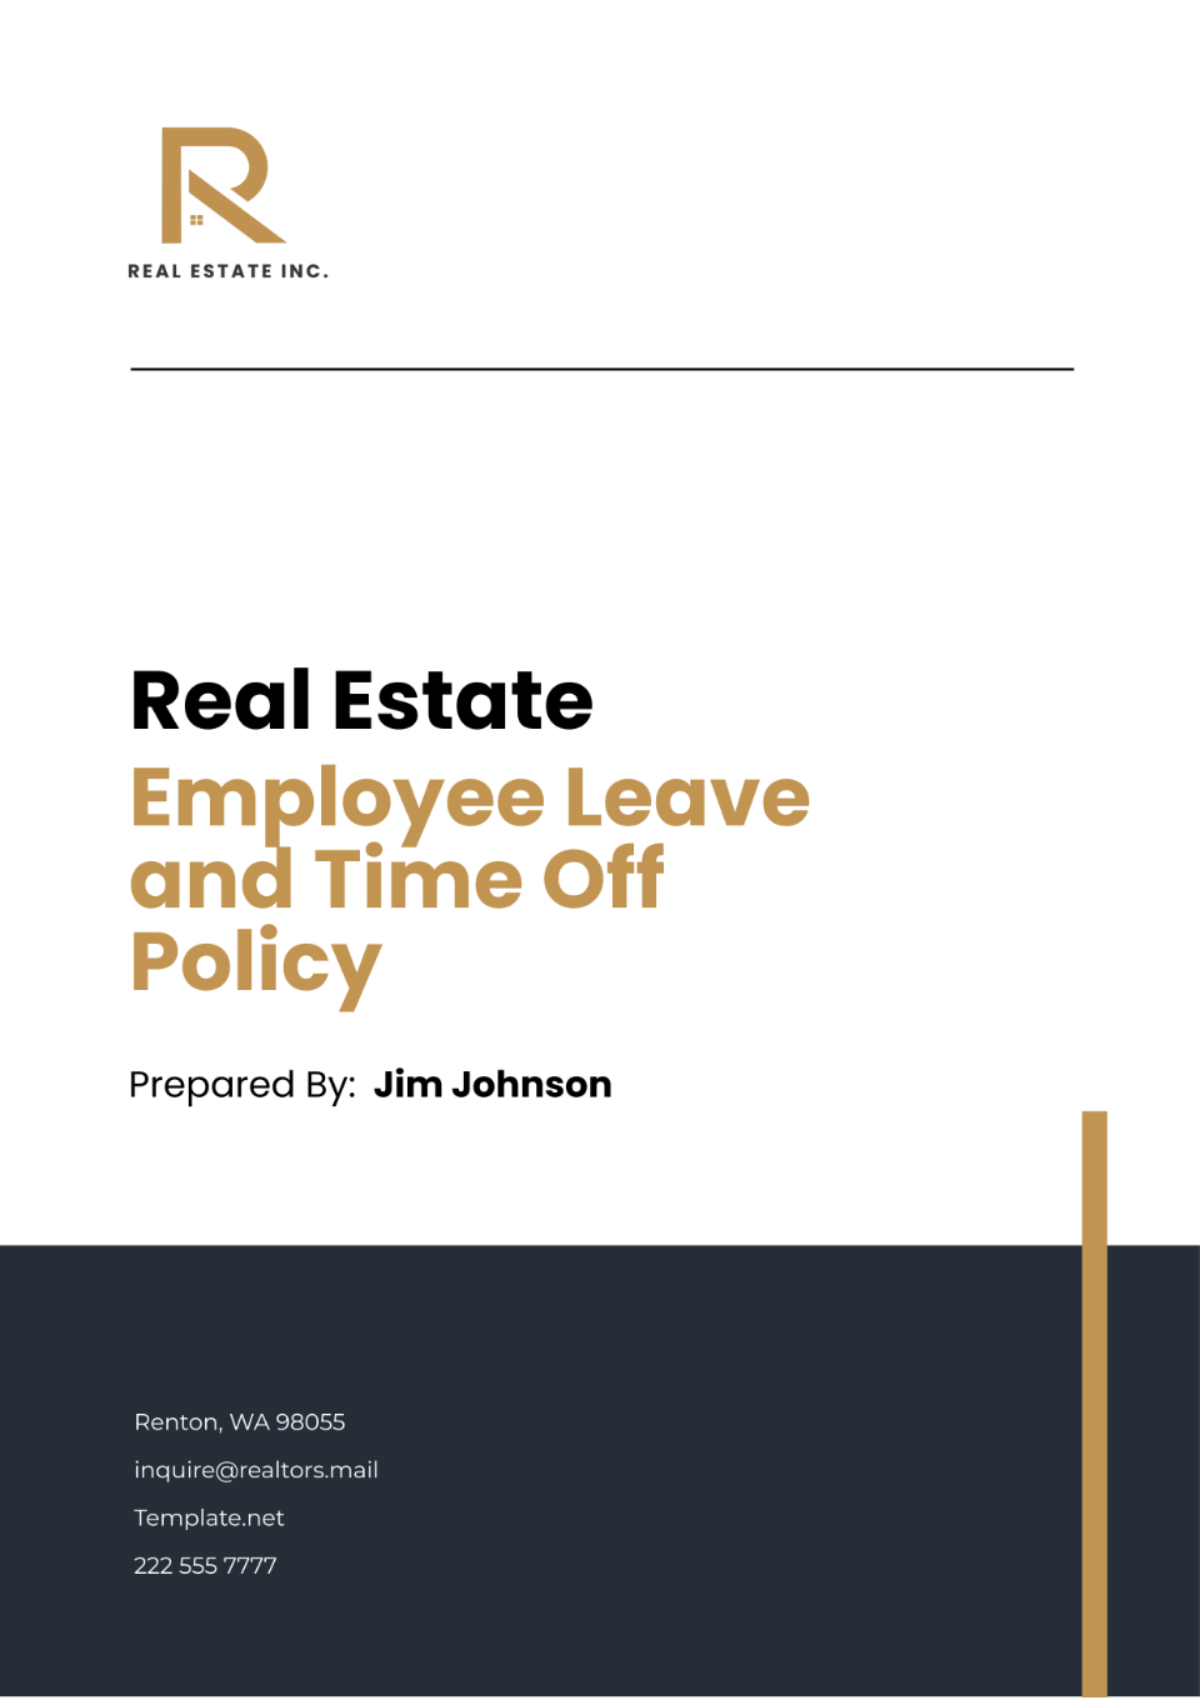 Real Estate Employee Leave and Time Off Policy Template